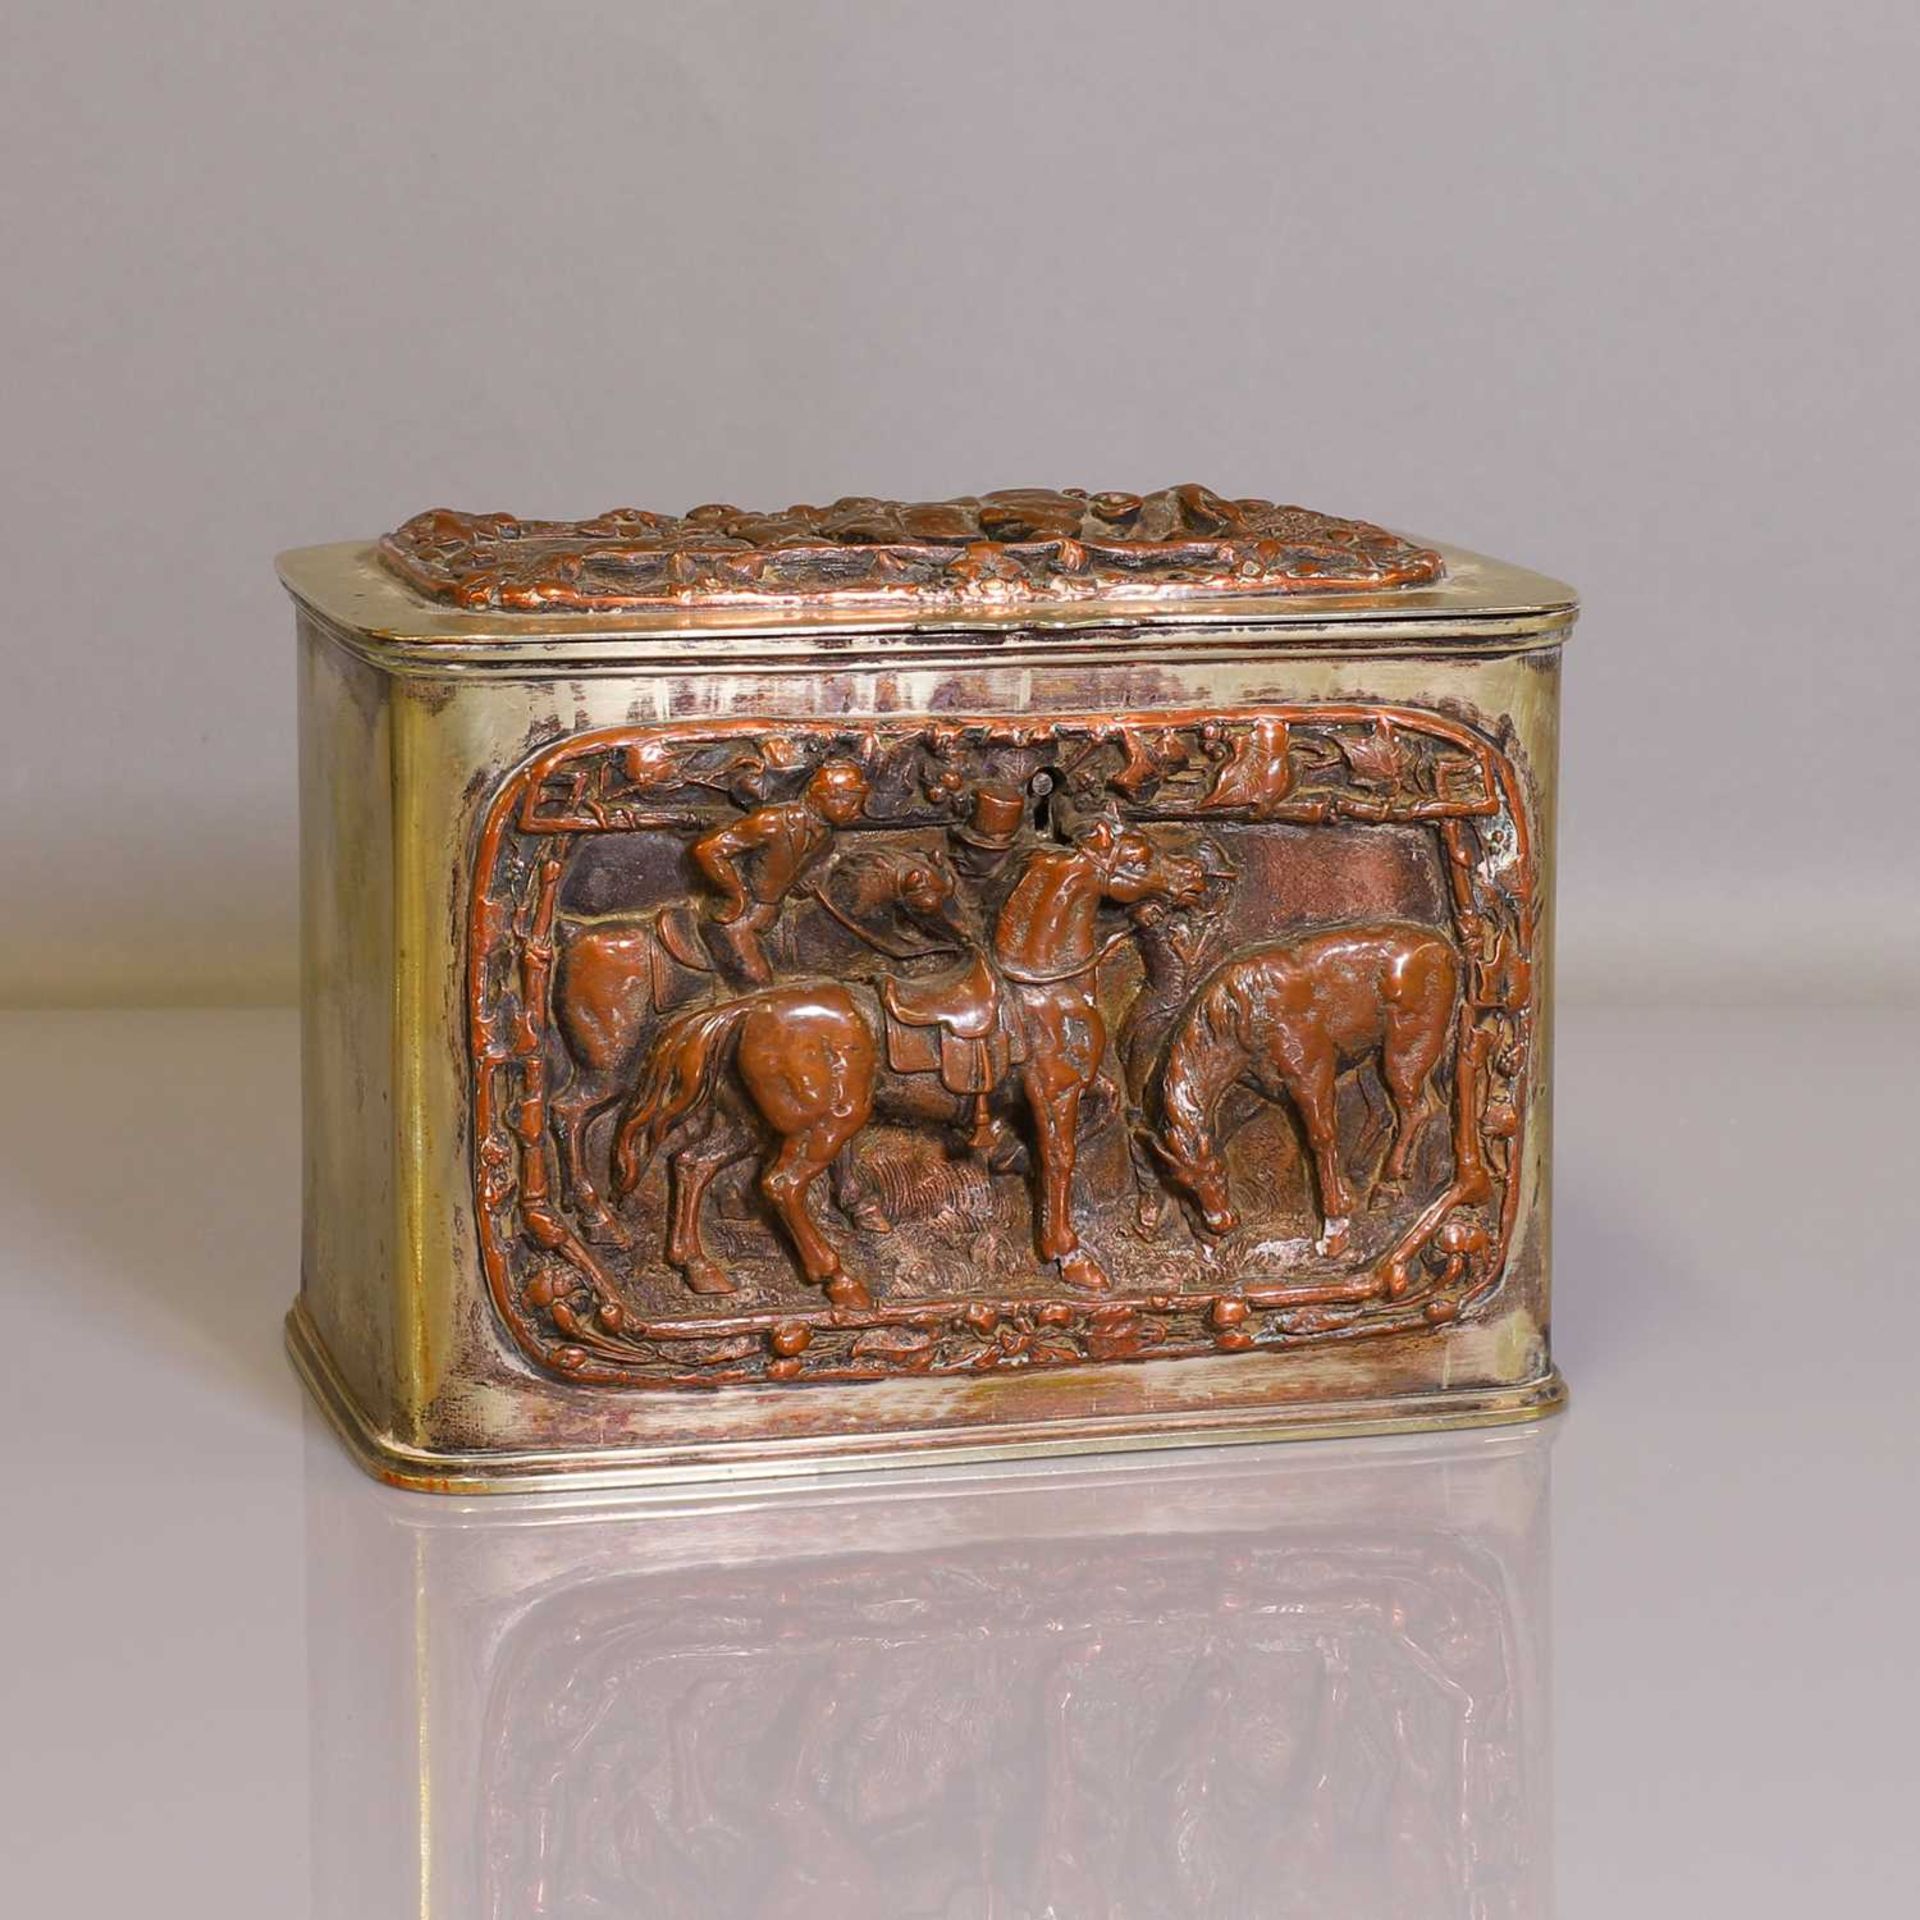 A silver-plated tea caddy - Image 7 of 7